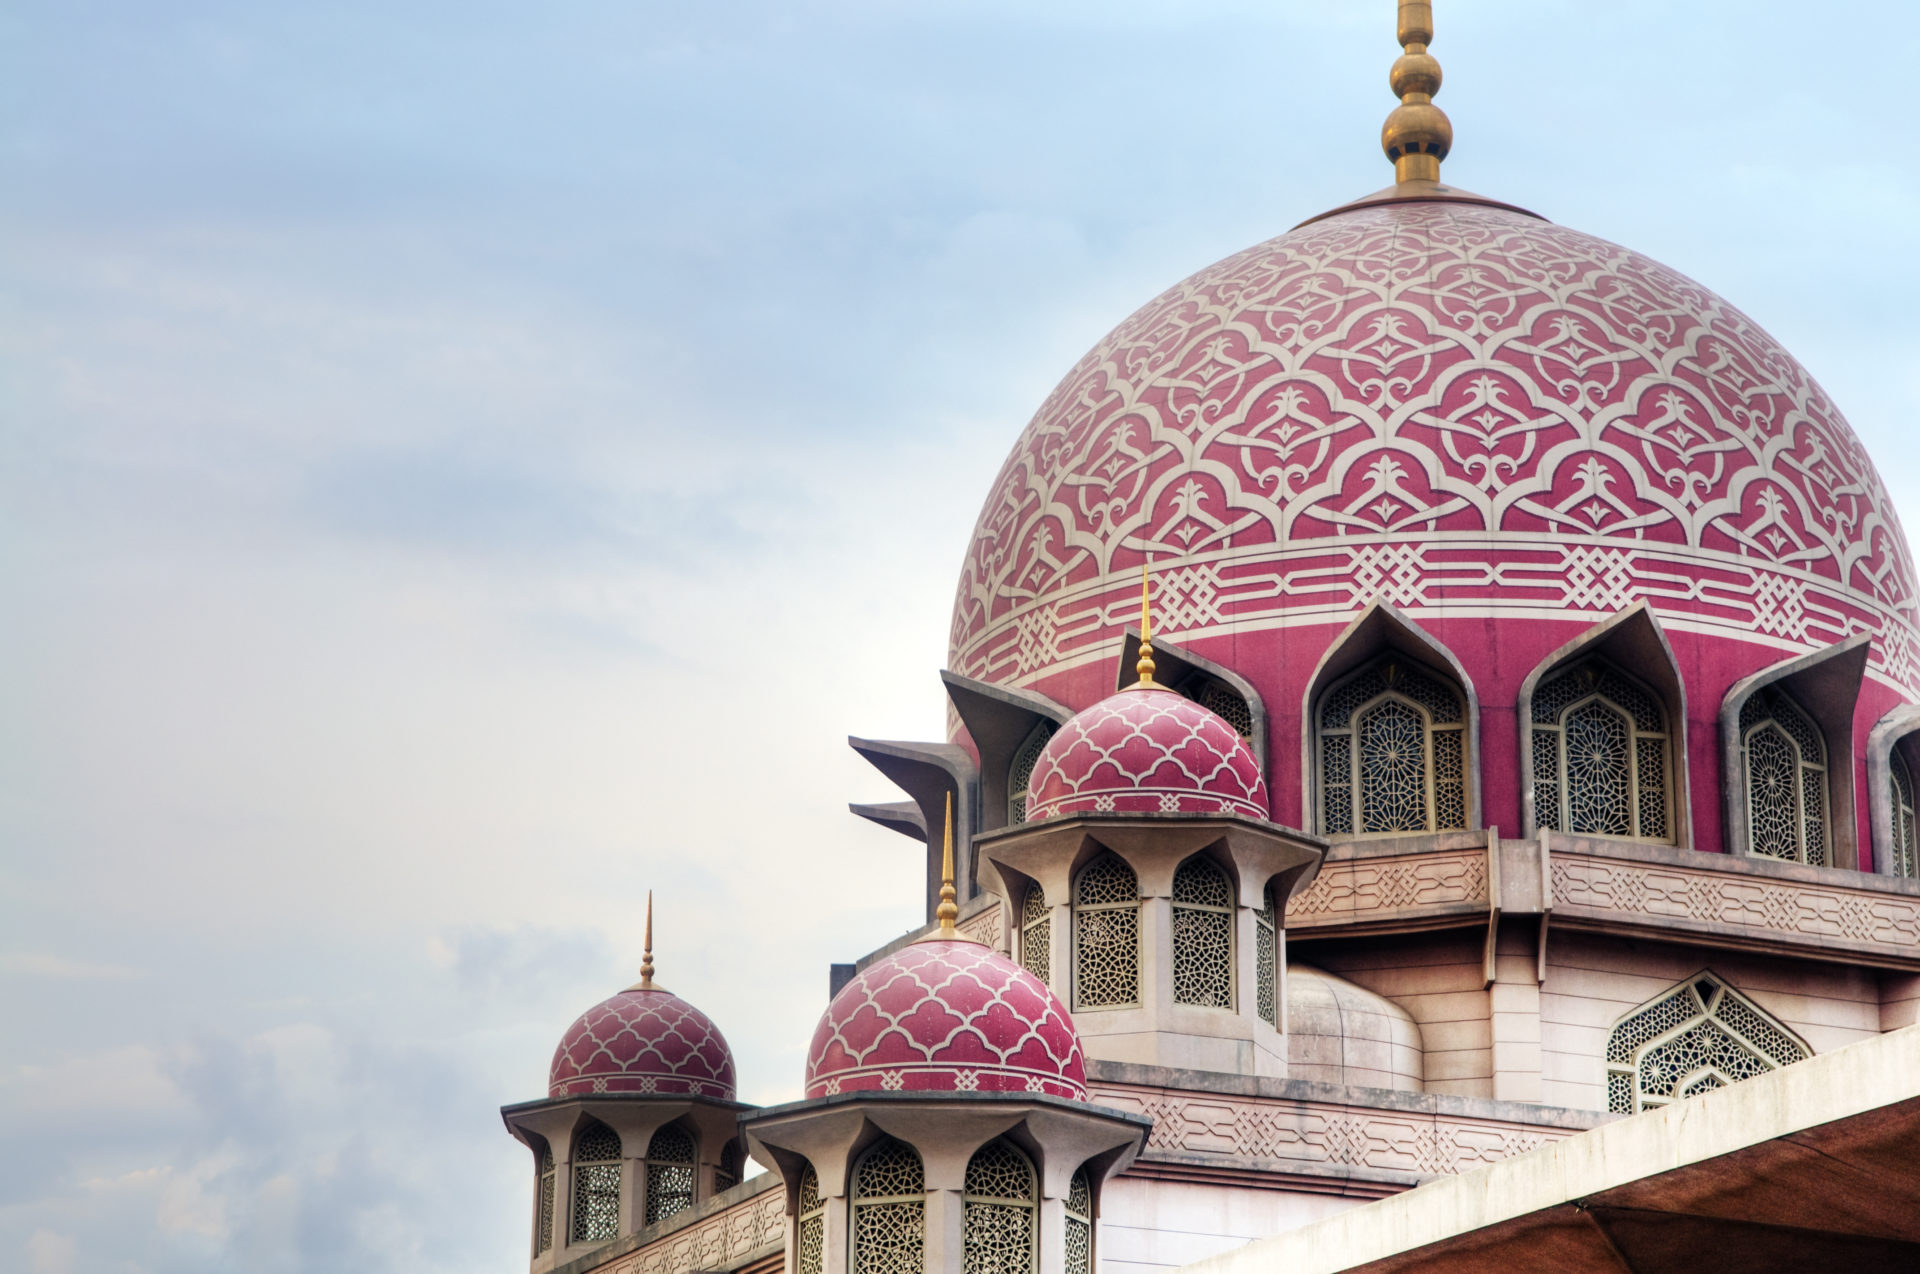 Smart mosques show growing demand for digital Islamic services